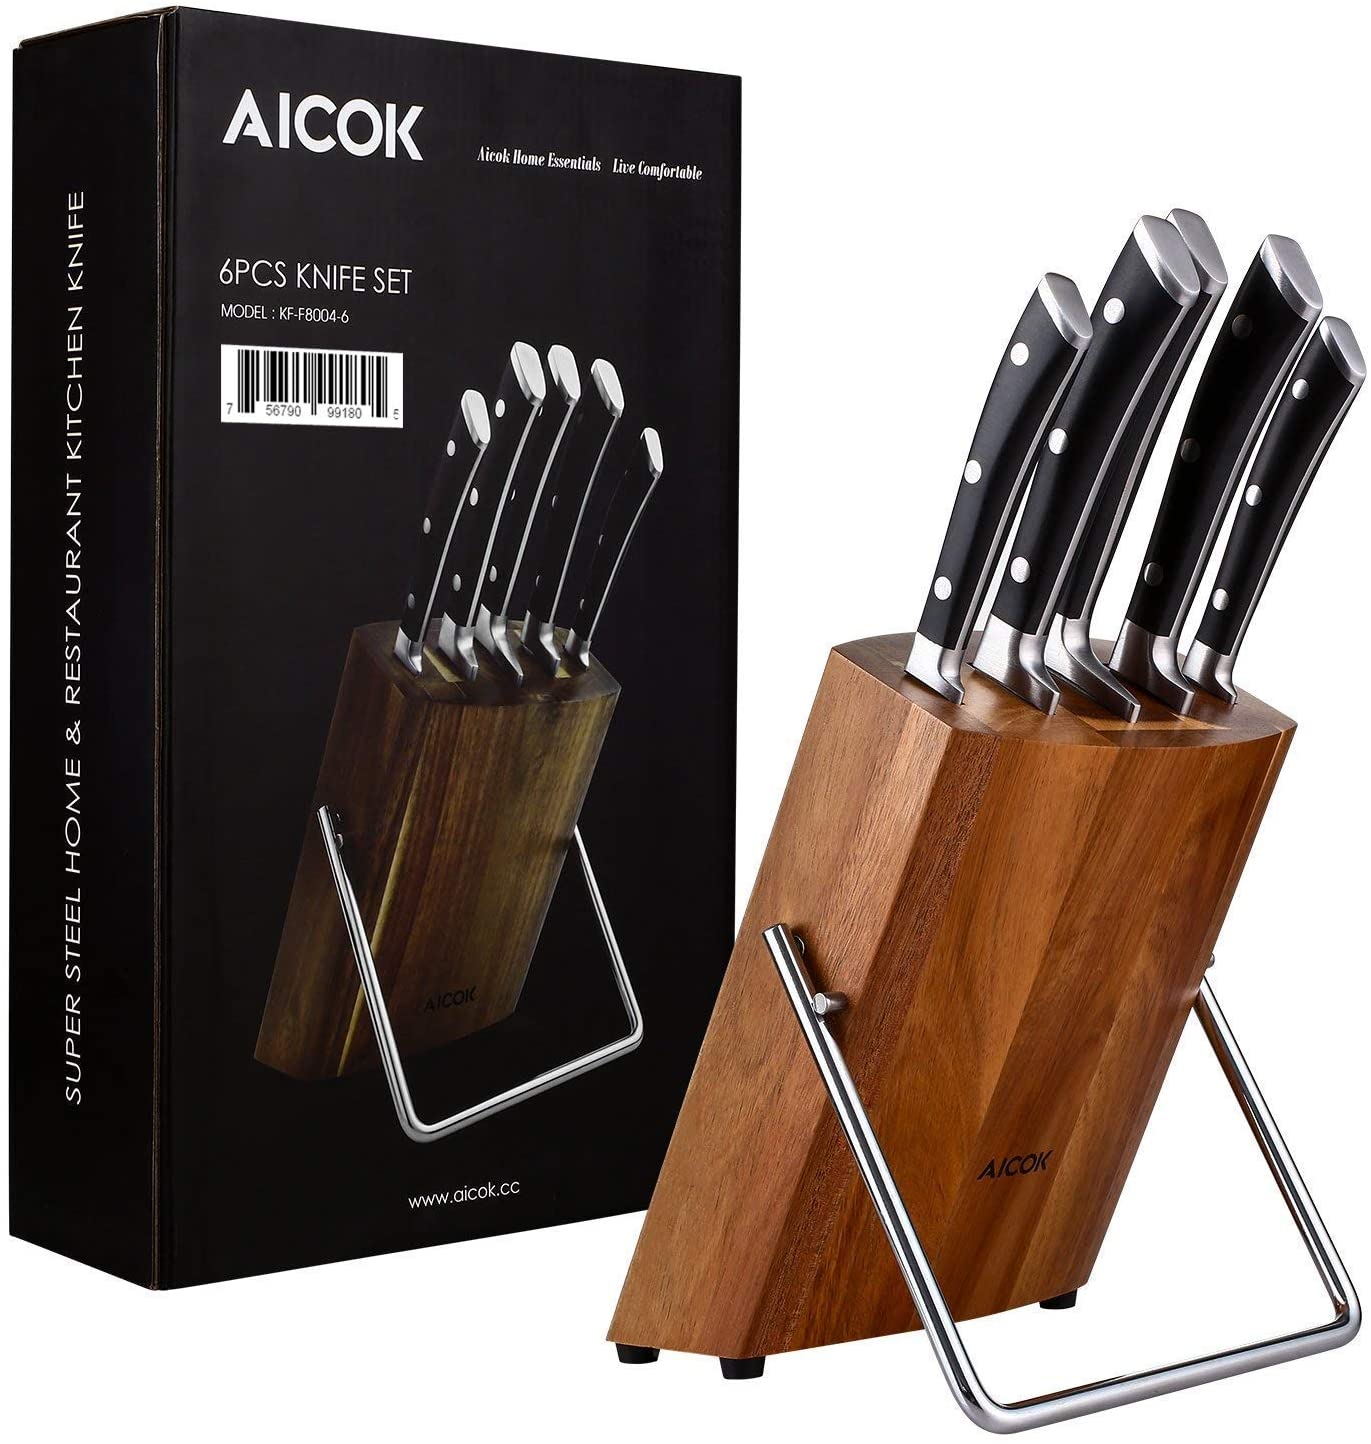 AICOK Kitchen Knife Set, German Stainless Steel Knife Block Set, 6 pcs Small Knife Set with Wooden Block